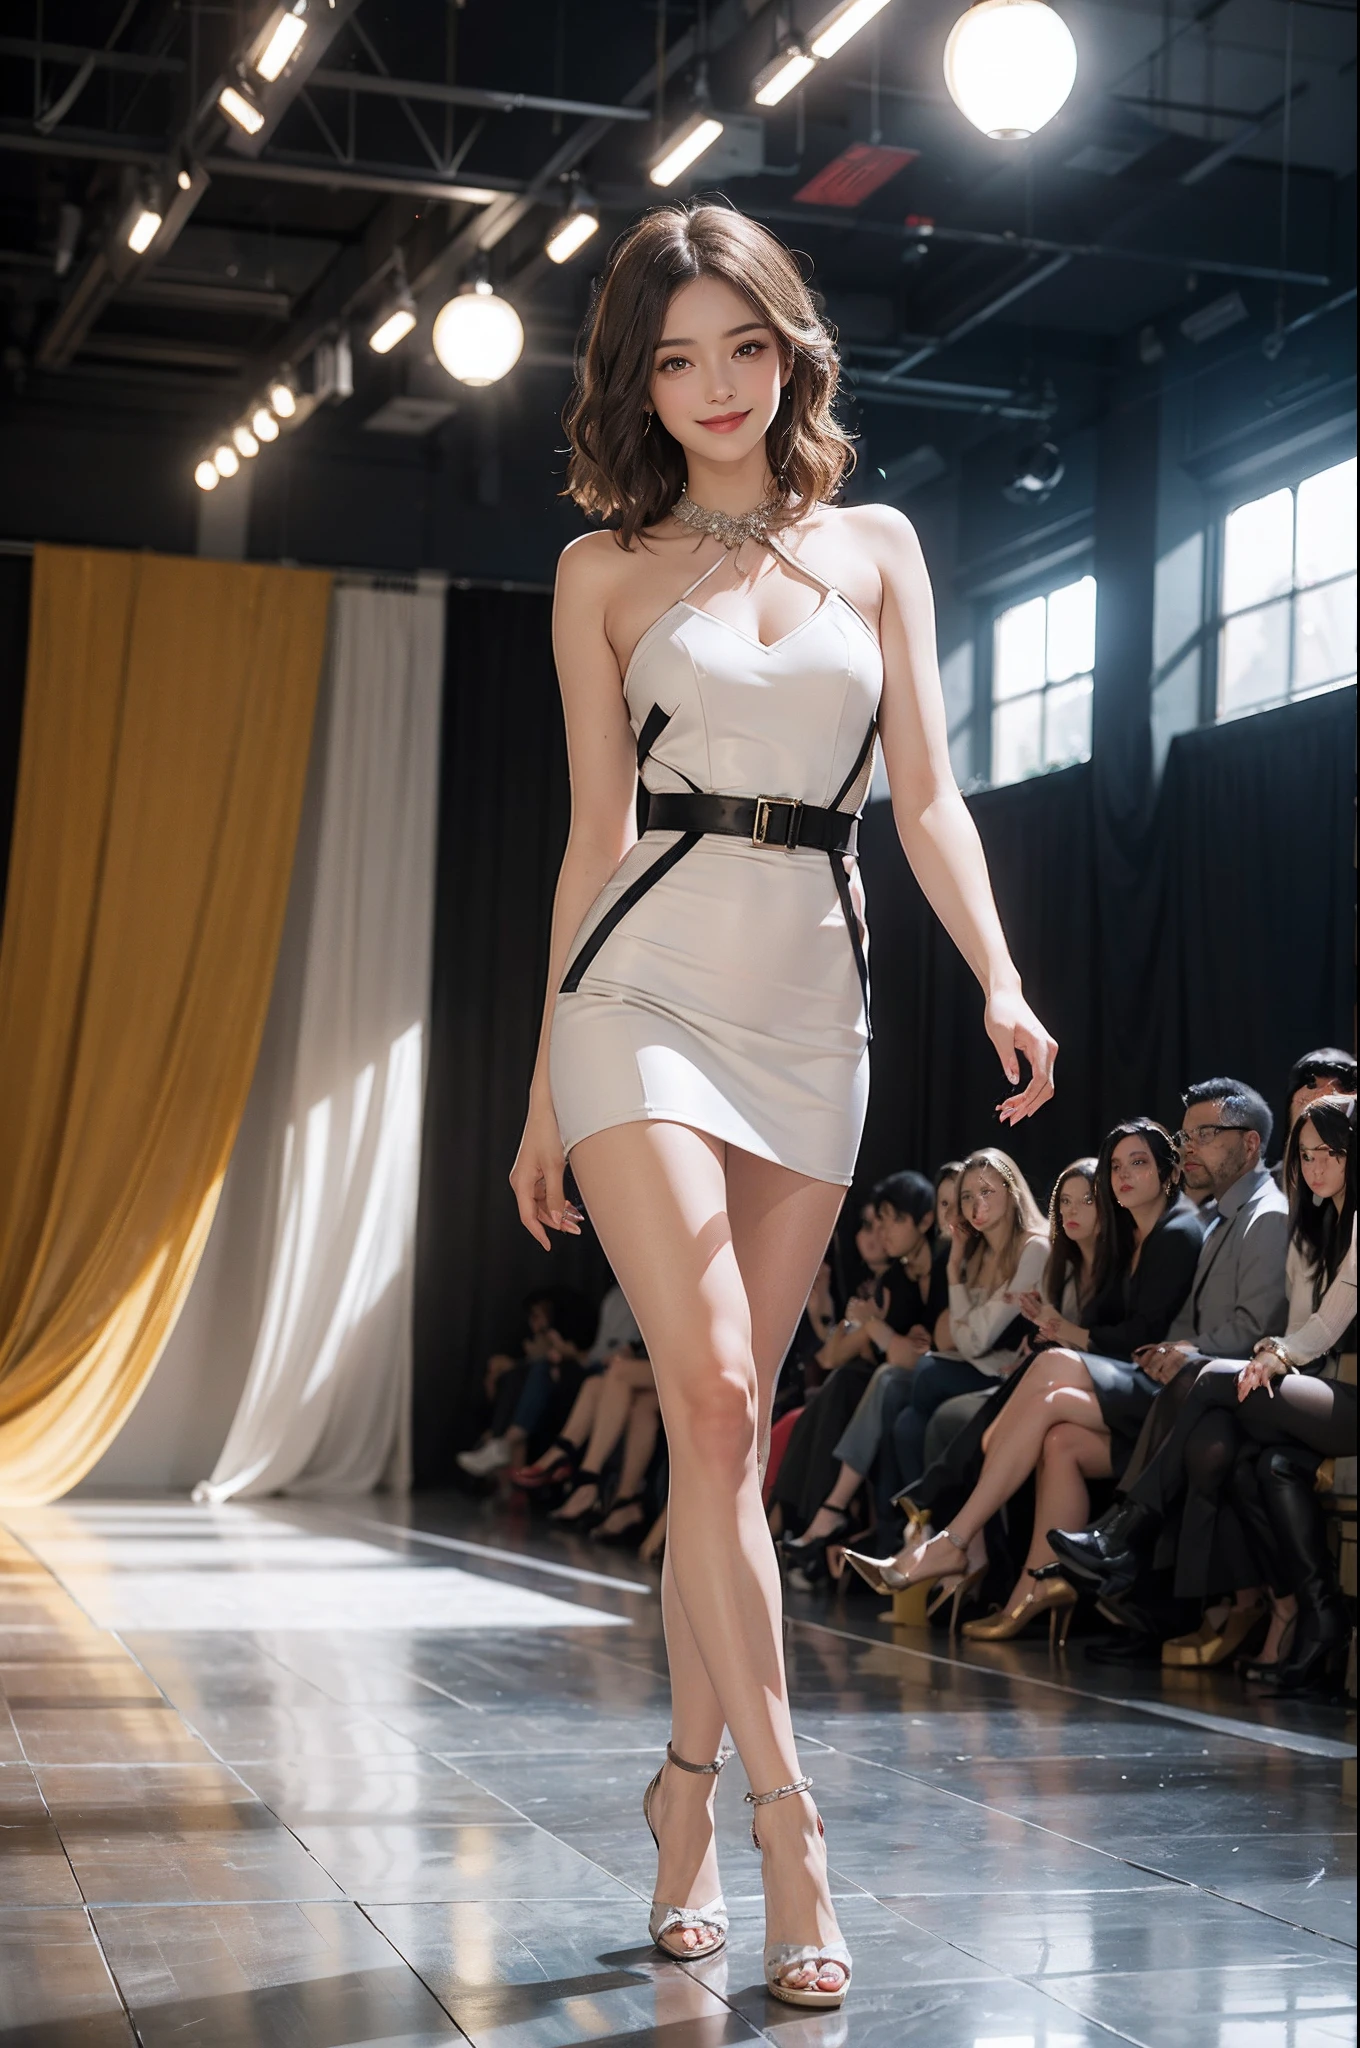 1girl in, (Smile:1.6) ,stunningly beautiful girl, Haute_Couture, designer dress, high-heels,high fashion,  High Brand,Famous fashion shows, (Indoor runway:1.4),Long shaped face, beautiful countenance, darkred eyes, Sandy Blonde Side Sweep Hair, Short hair, Long ringlet, catwalk,Red carpet,Colorful confetti, Vivid colors, masutepiece, Best Quality, absurderes, Highest Quality, Amazing details, 8K, Aesthetic,Perfect Lighting,Look at viewers,(dynamic ungle:1.2),Large stage